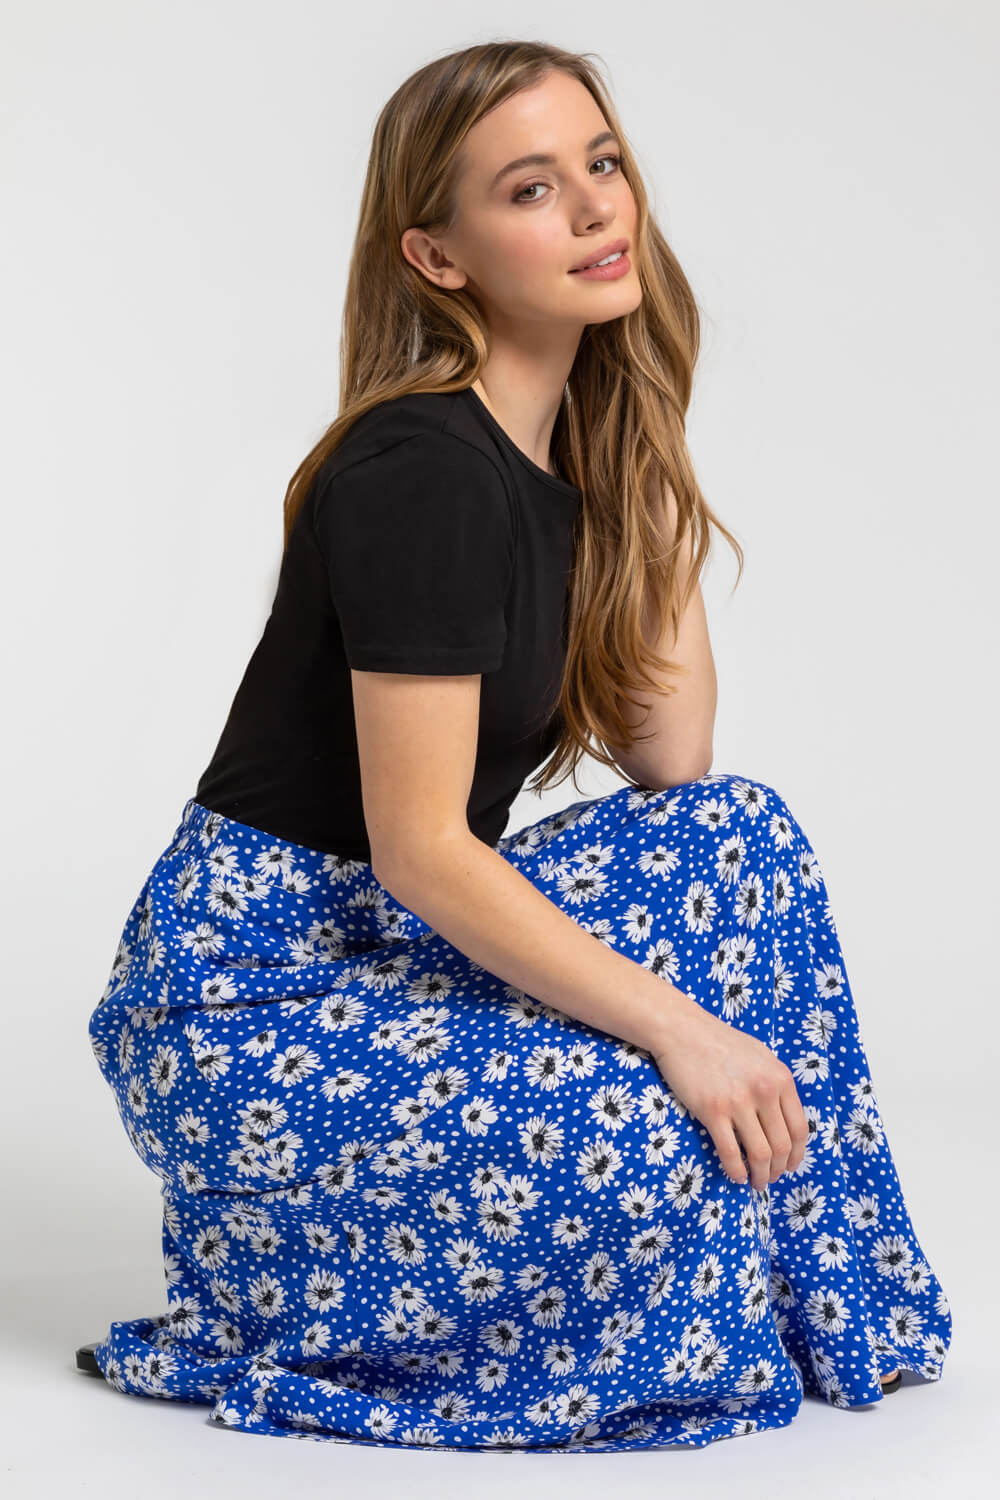 Blue Petite Floral Print A-Line Skirt, Image 4 of 4